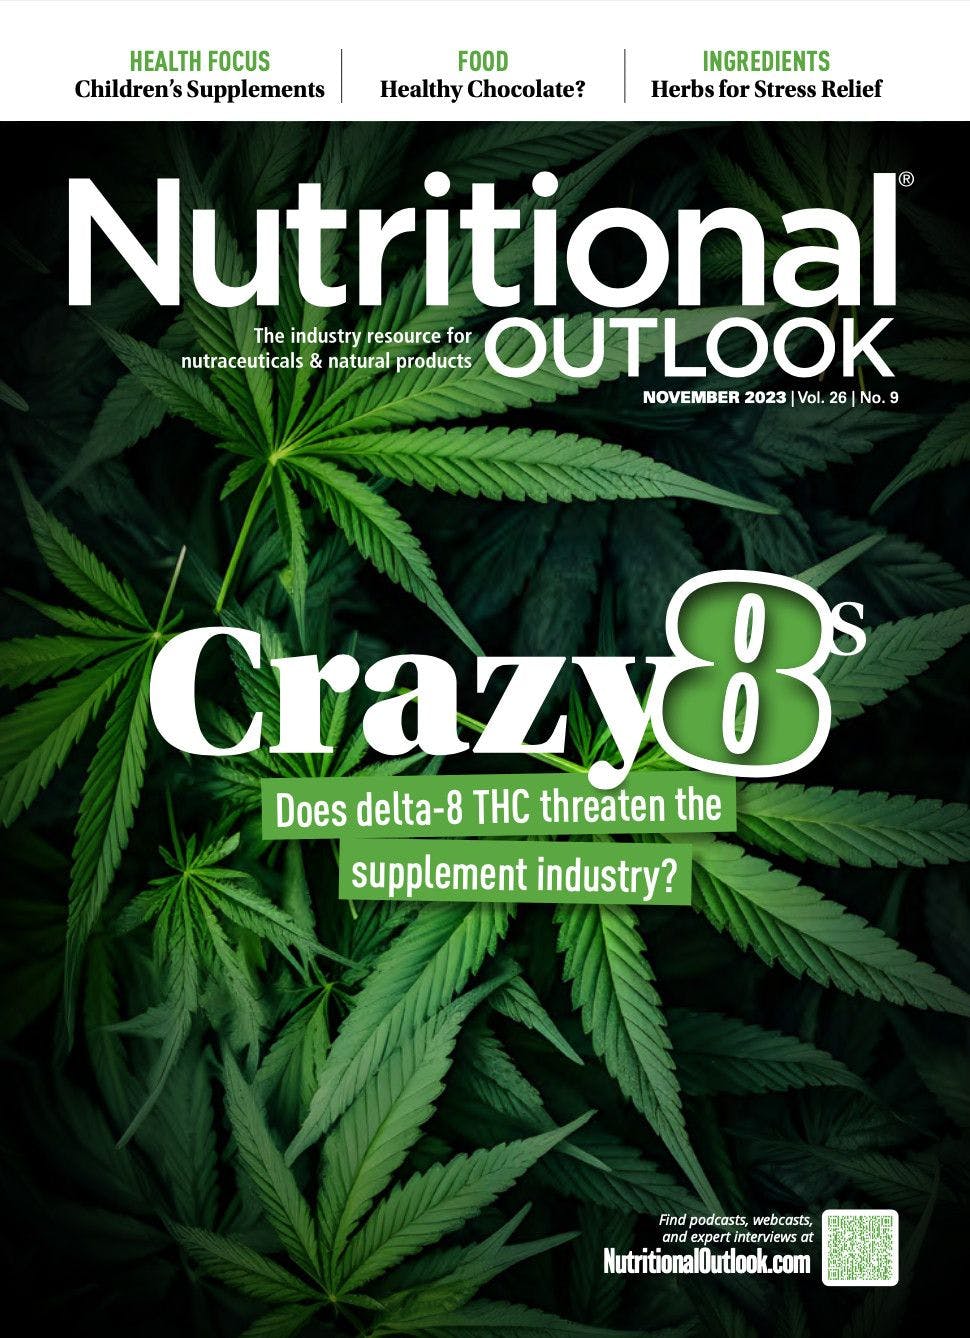 Nutritional Outlook Vol. 26 No. 9